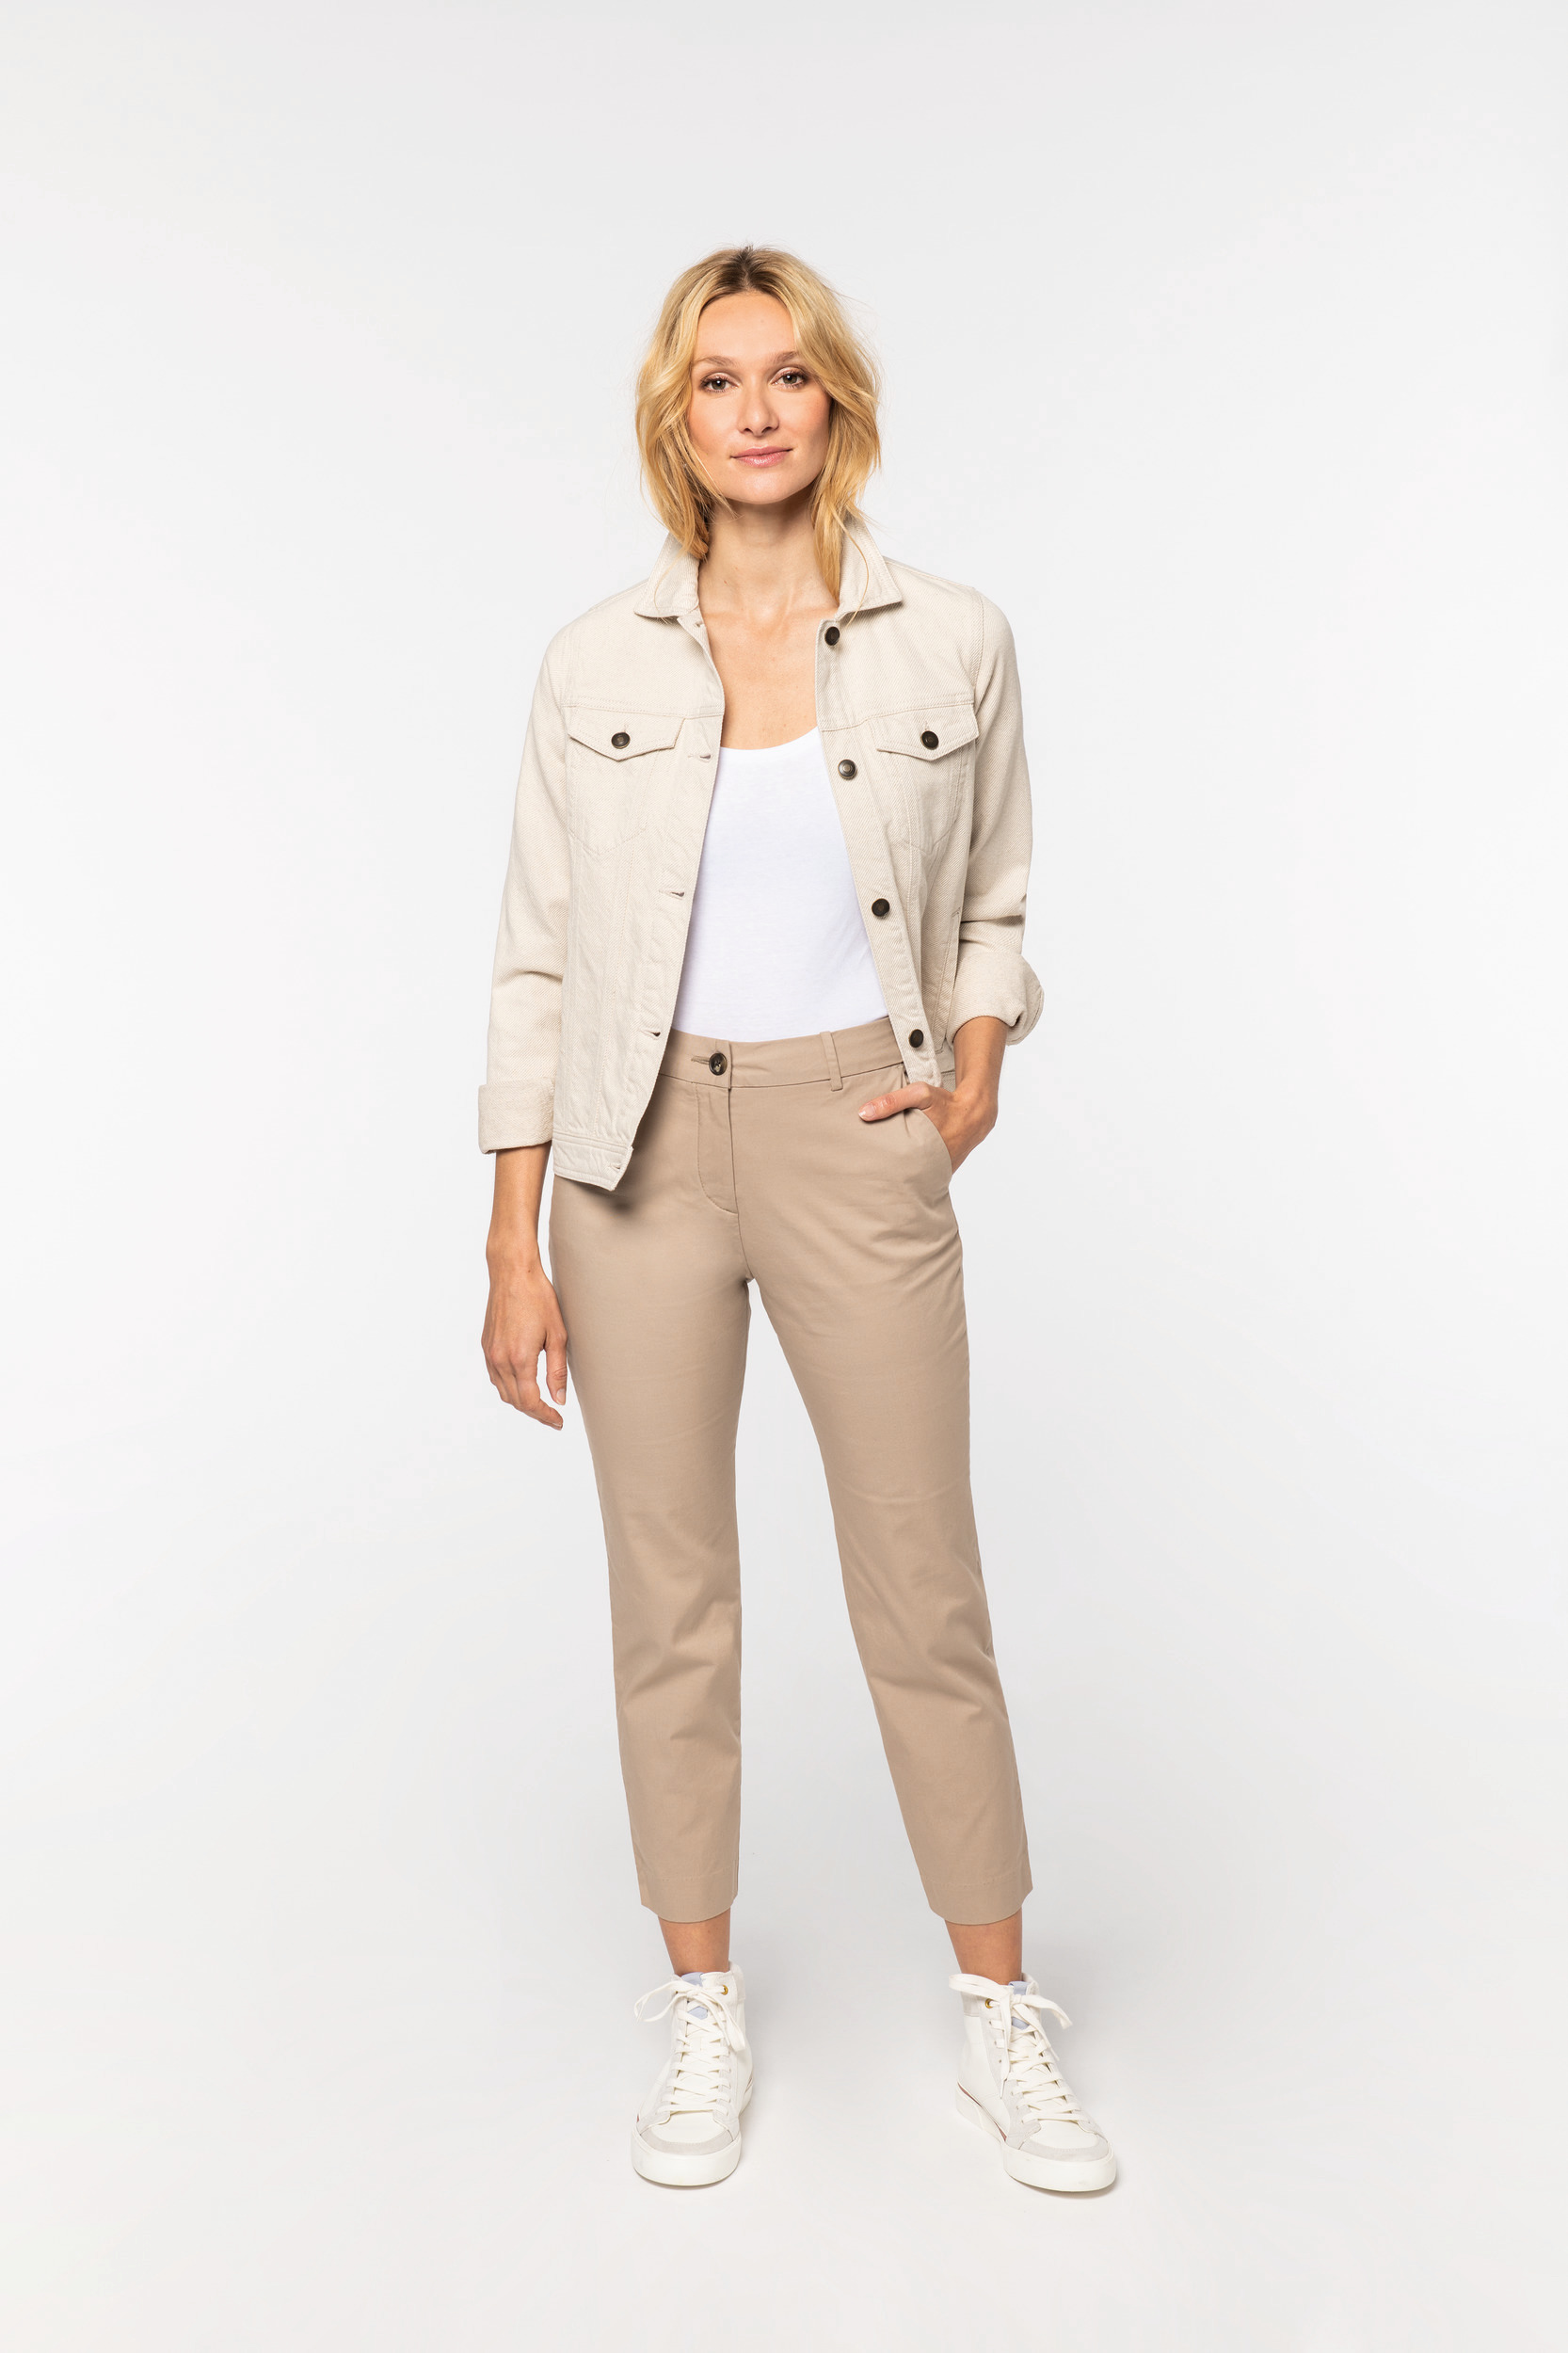 Tan trousers pants - petite workwear ideas | Work outfits women, Office outfits  women, Fashionable work outfit